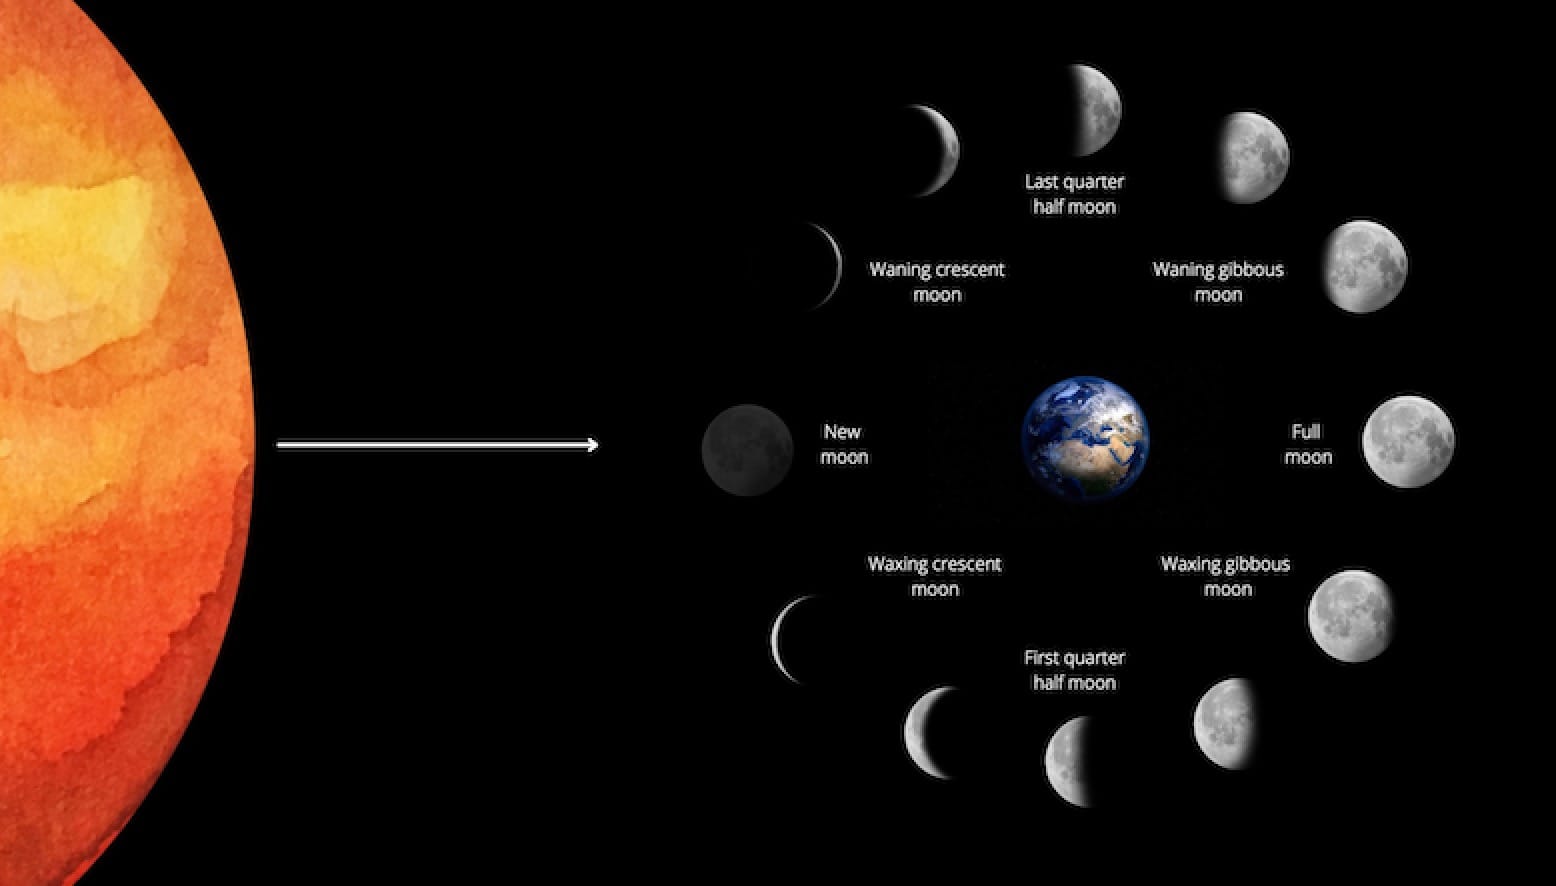 Galileo, and the phases of Venus and the moon.